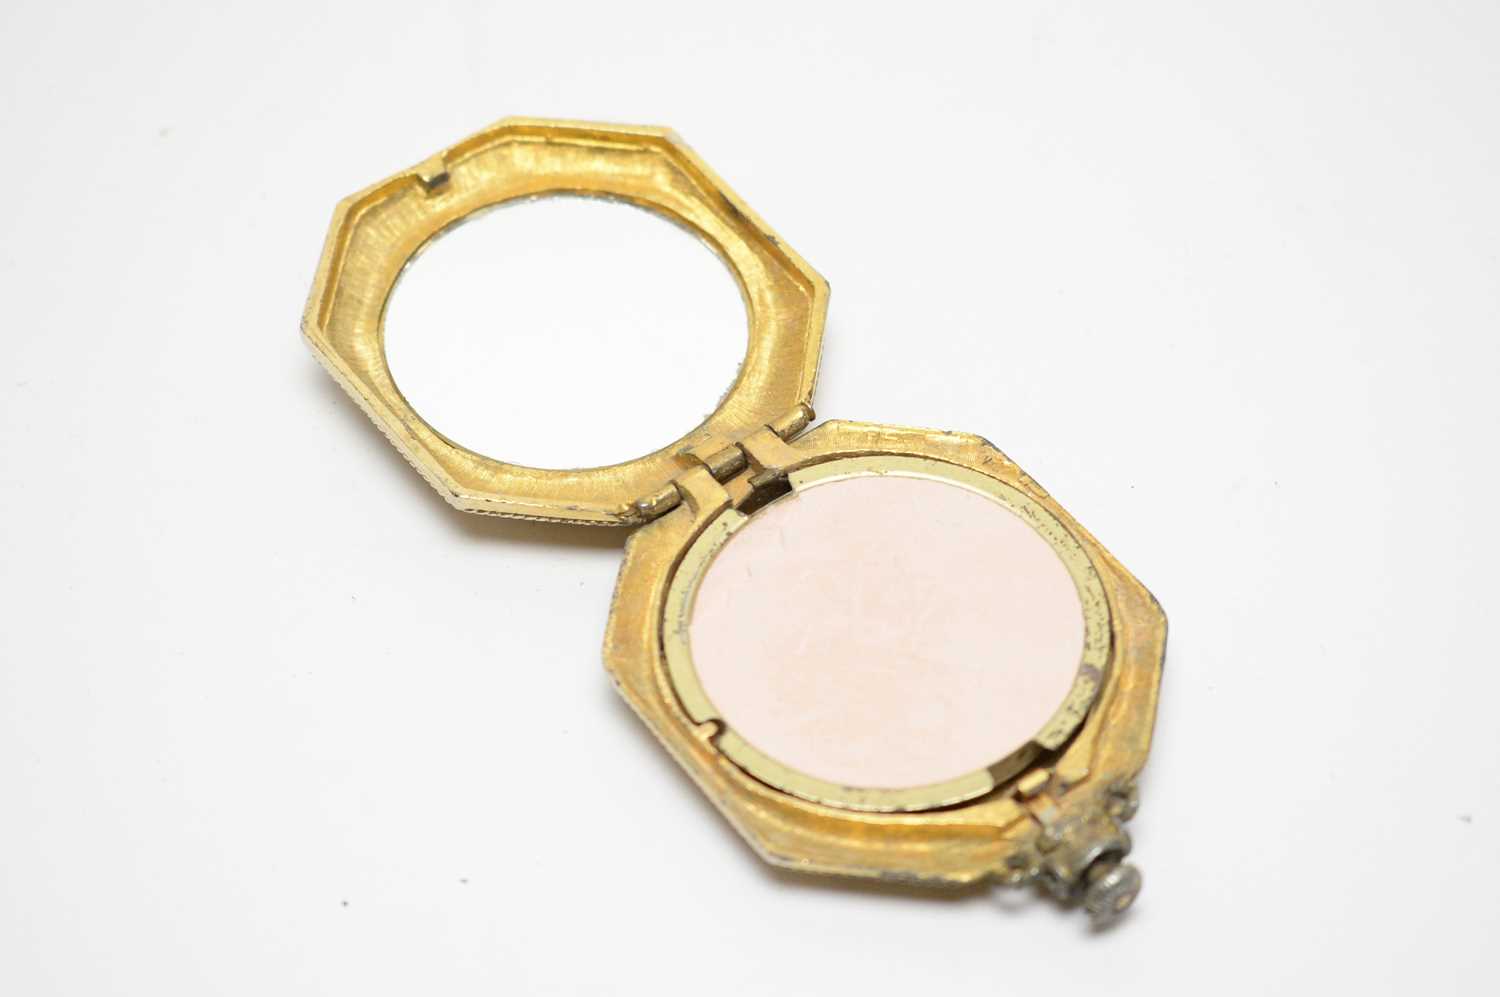 1950s pressed powder compacts in the style of pocket watches - Image 3 of 4